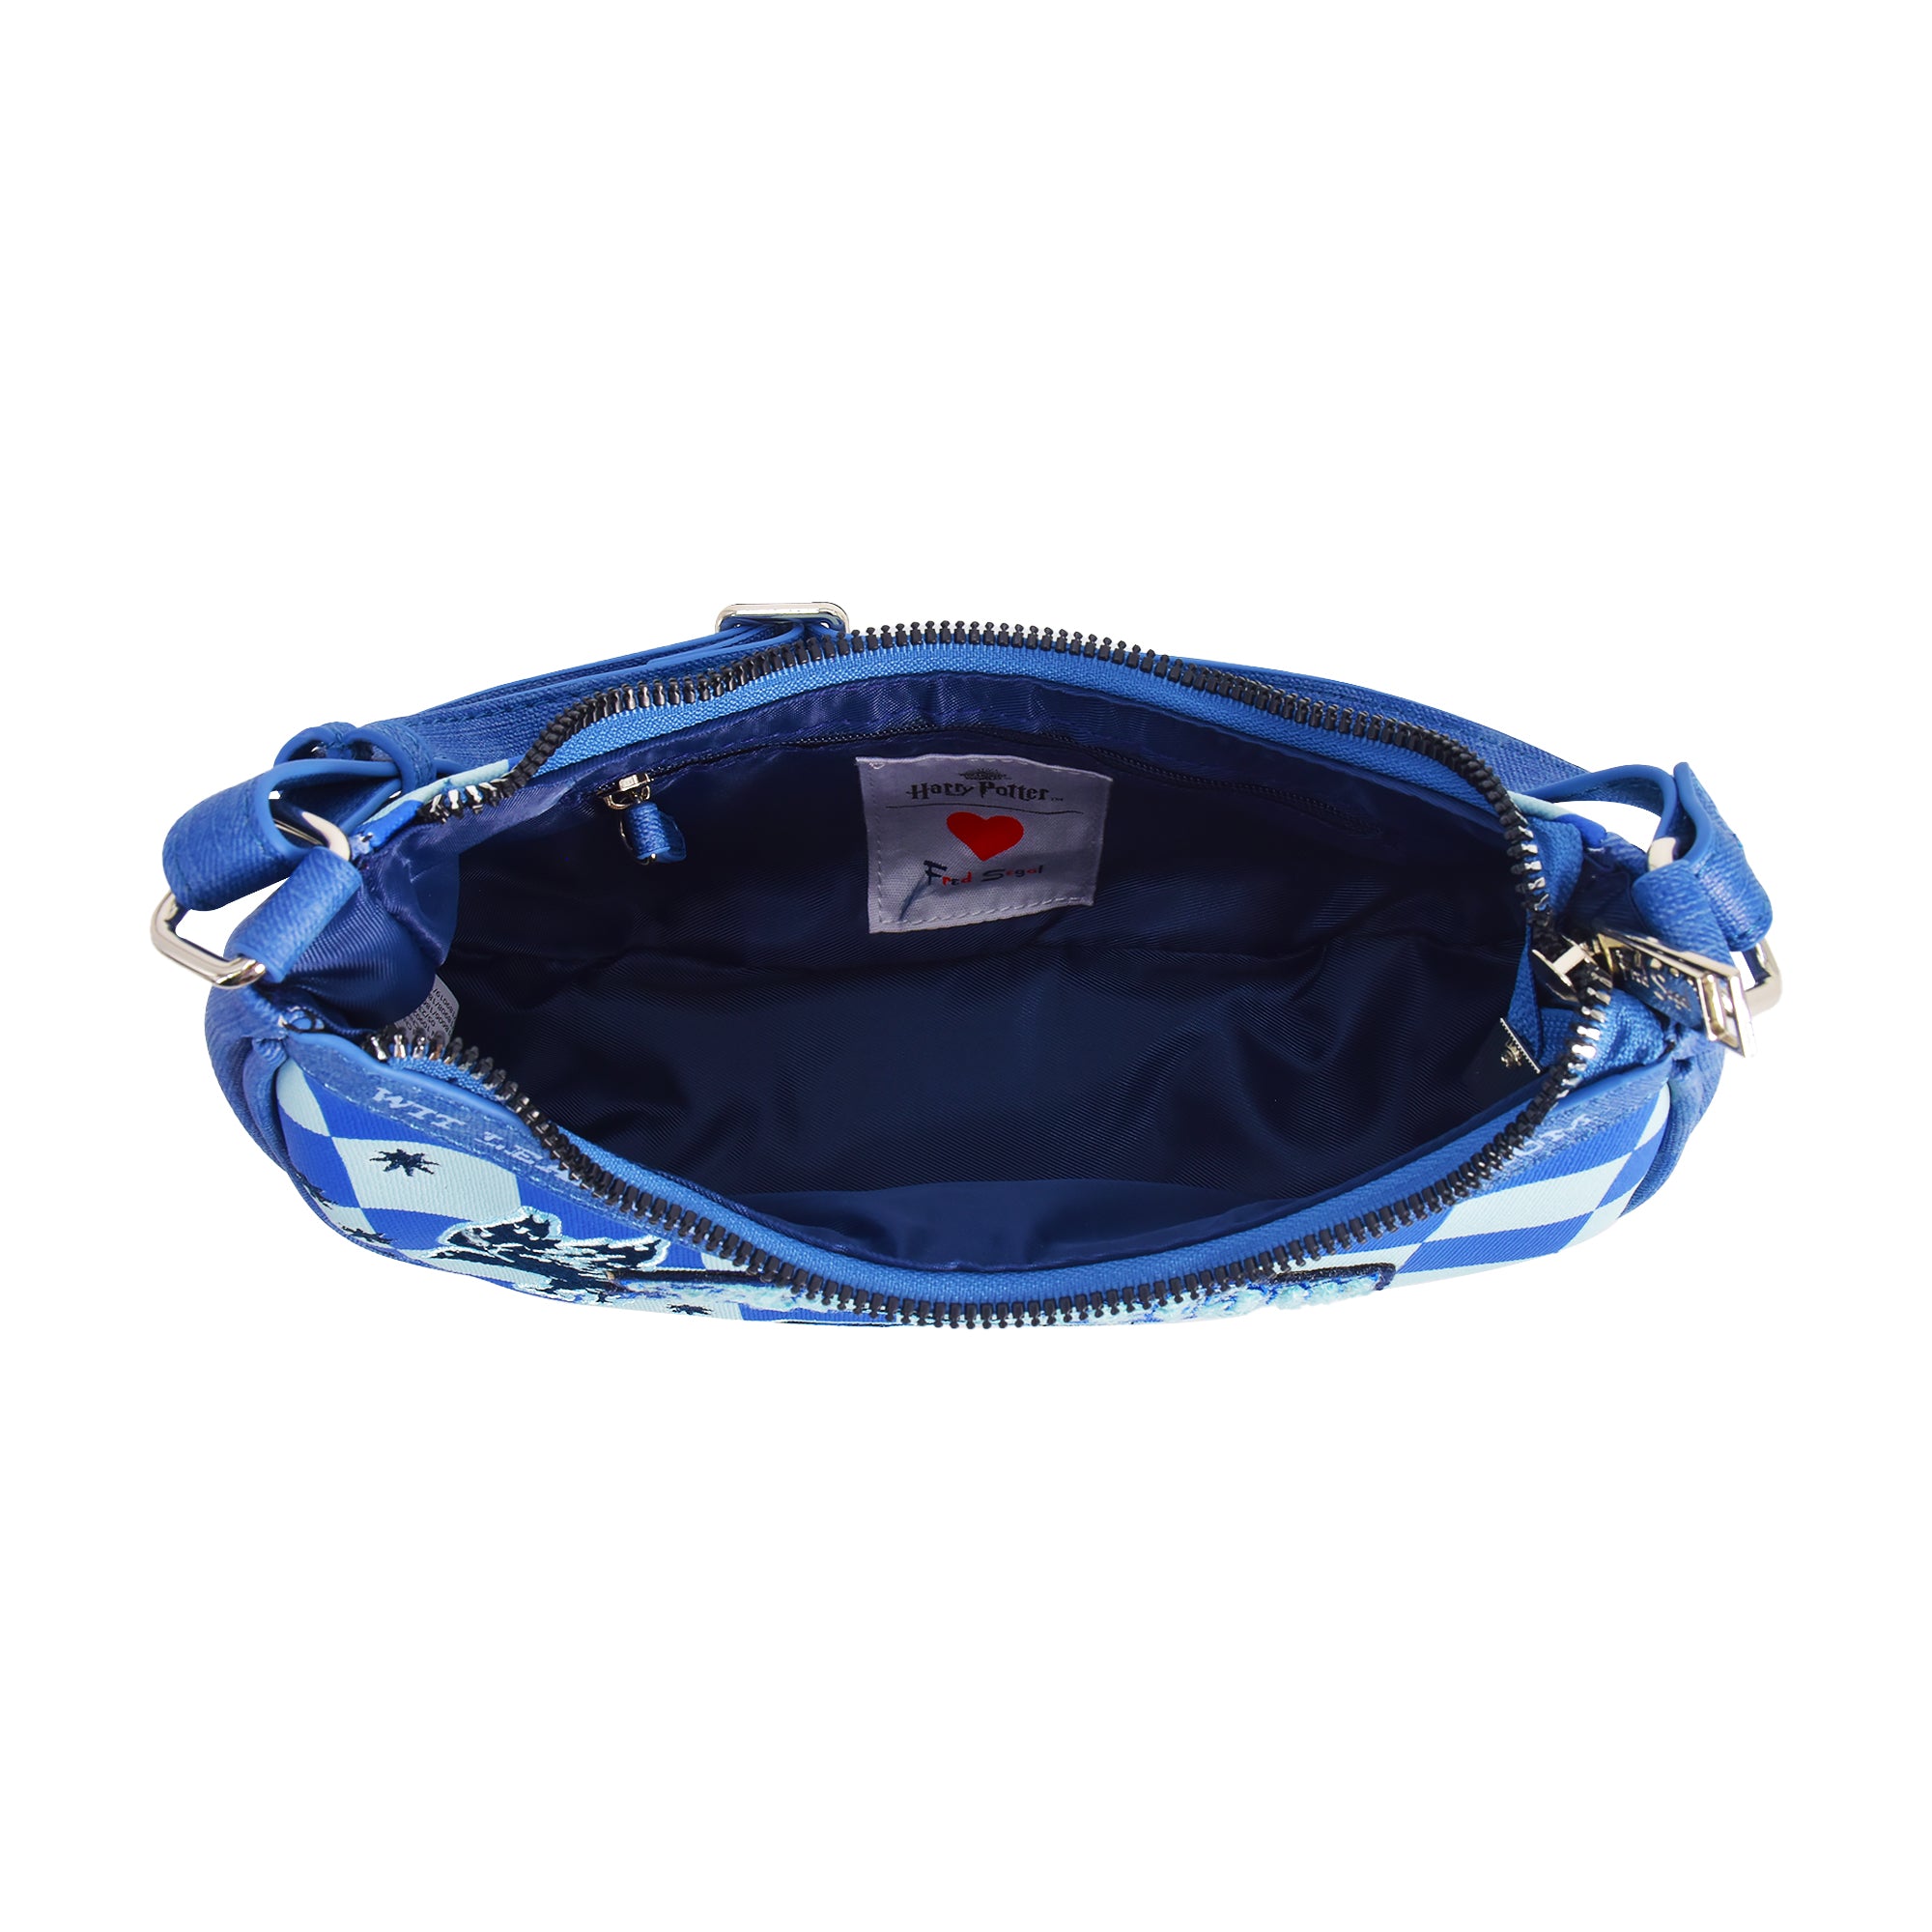 Fred Segal - Harry Potter Quidditch House Ravenclaw Crossbody